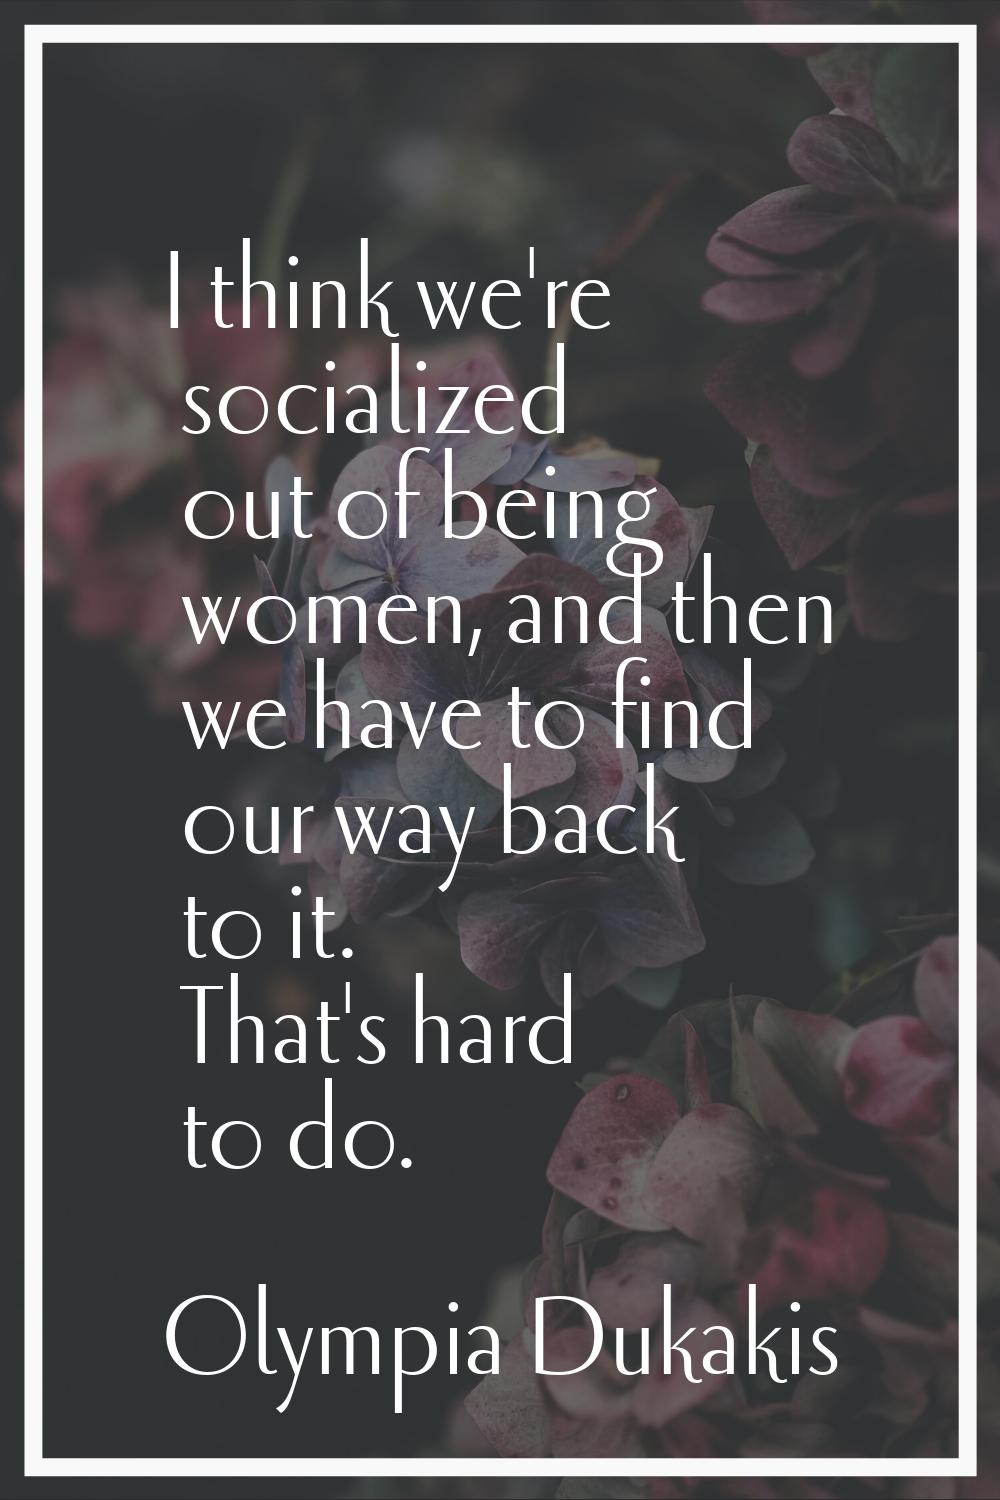 I think we're socialized out of being women, and then we have to find our way back to it. That's ha